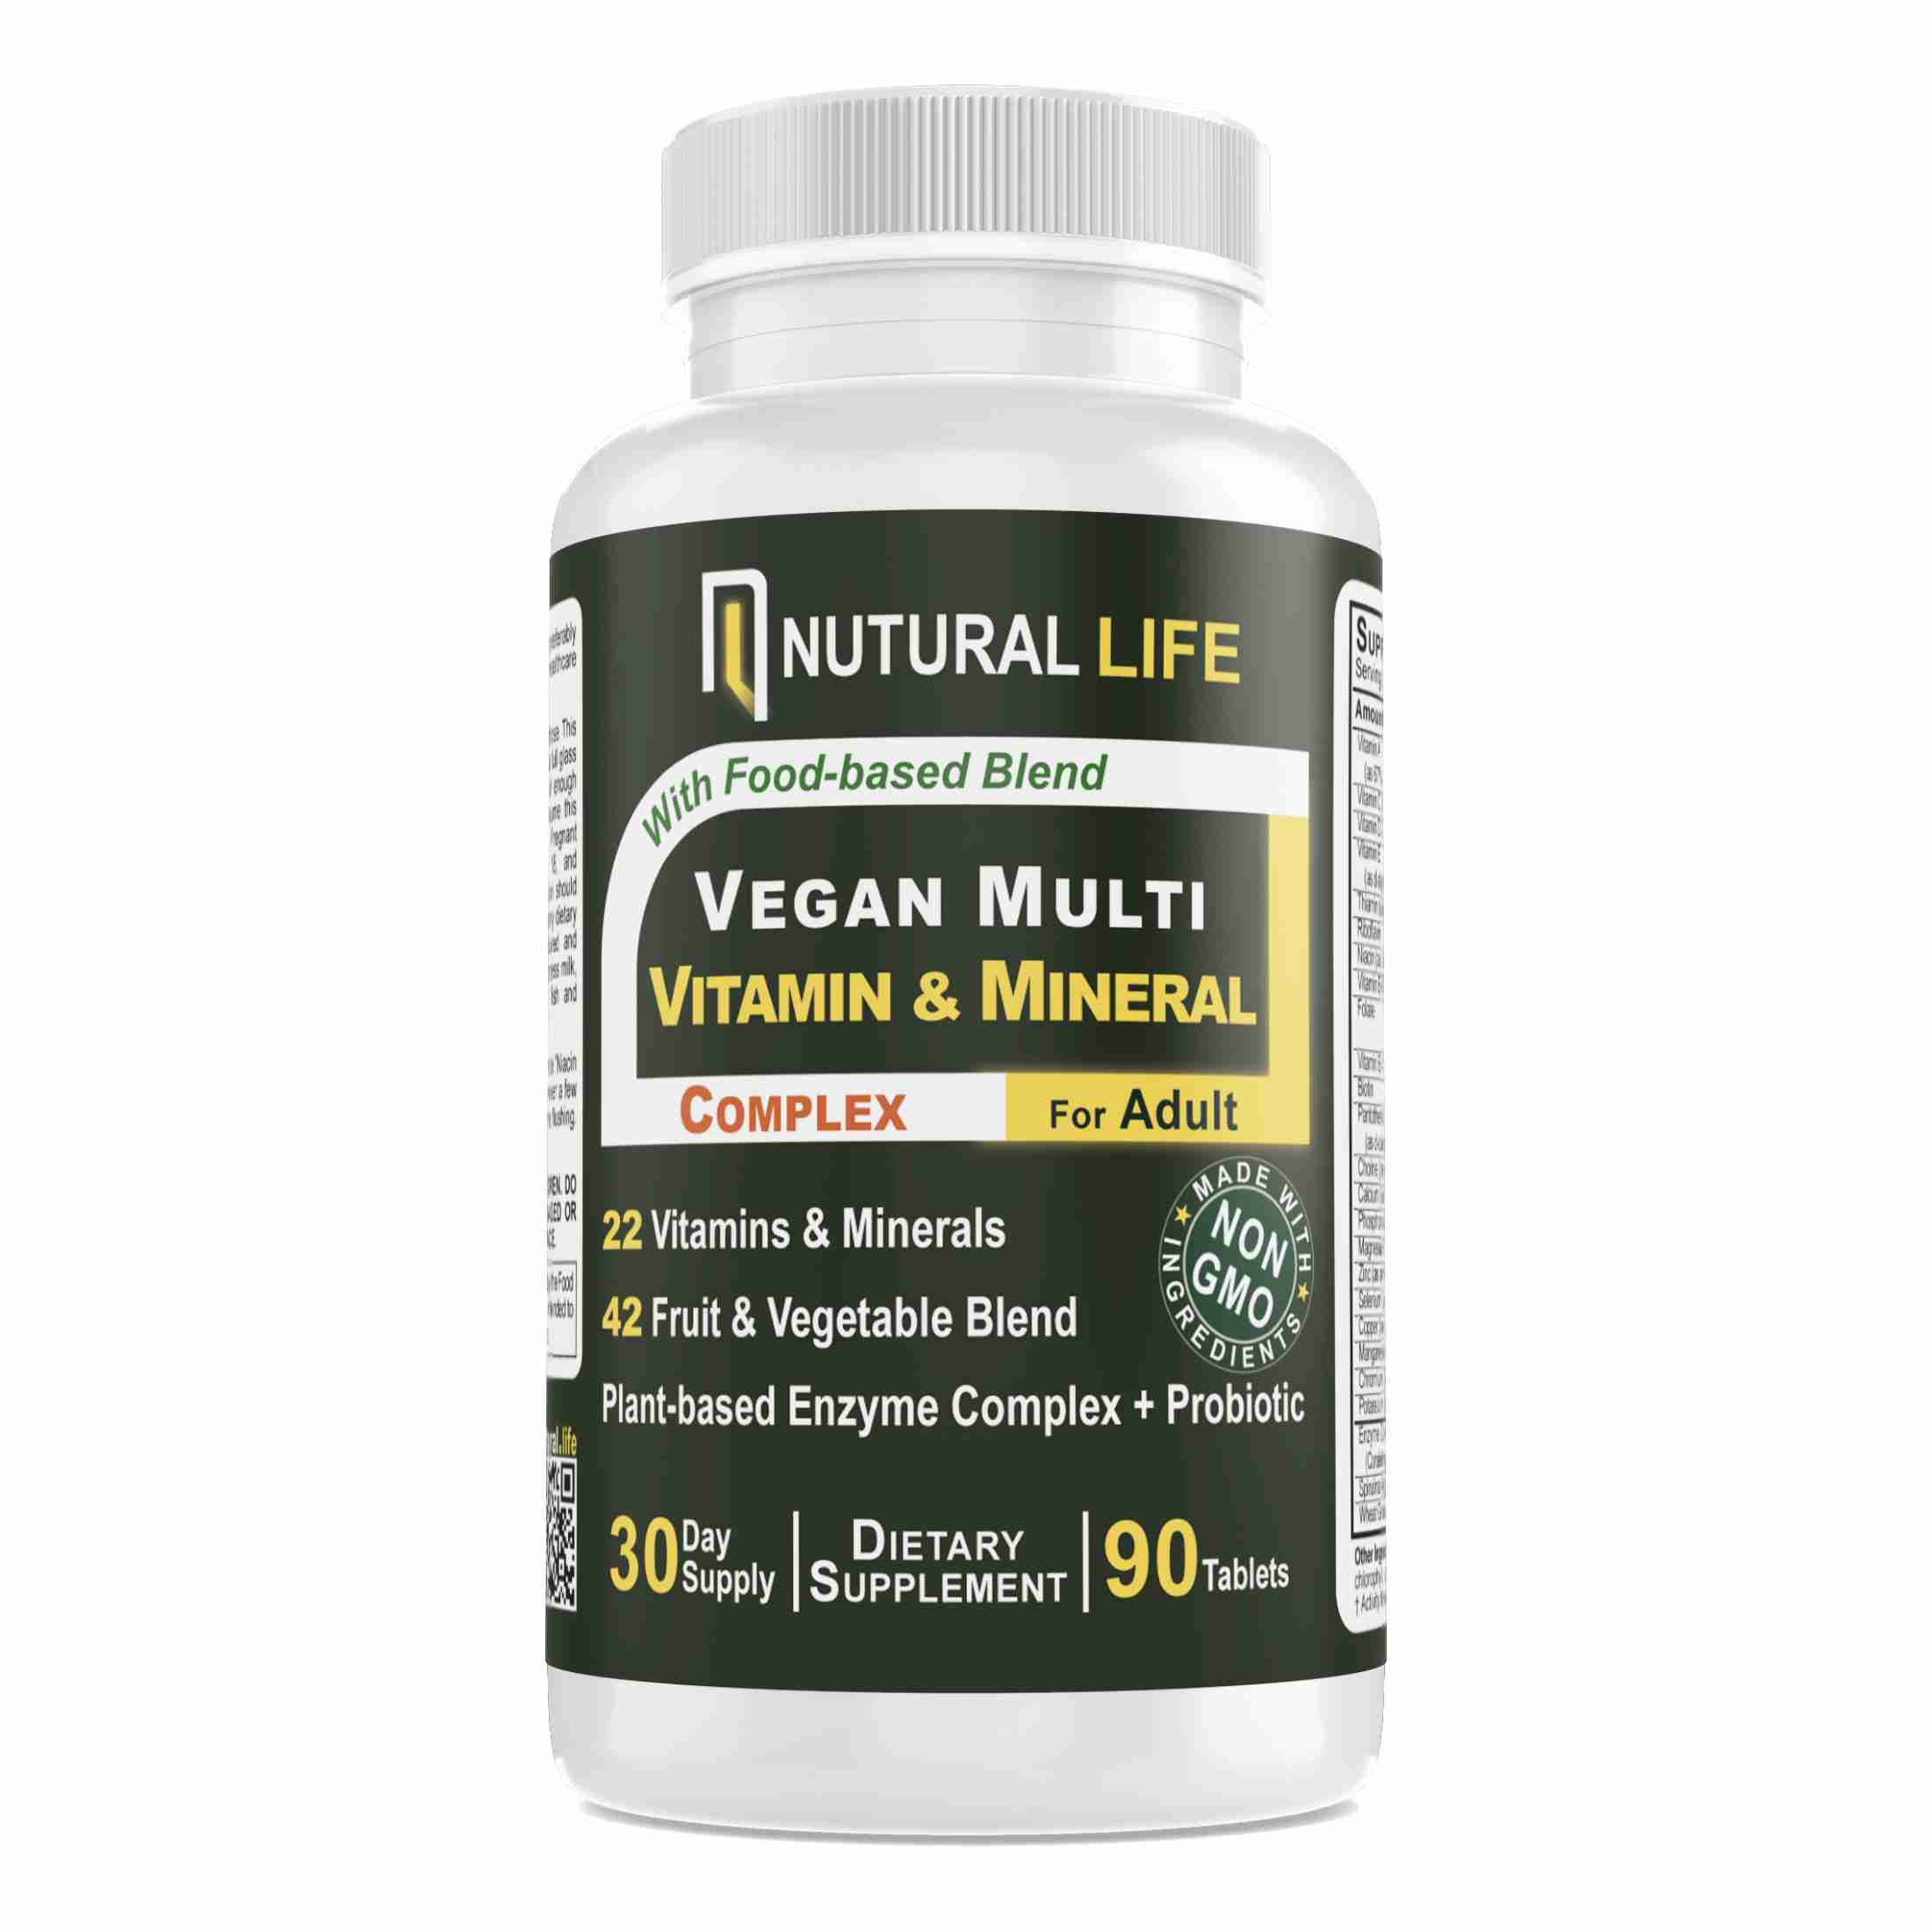 multivitamins-and-multiminerals-supplement with cash back rebate